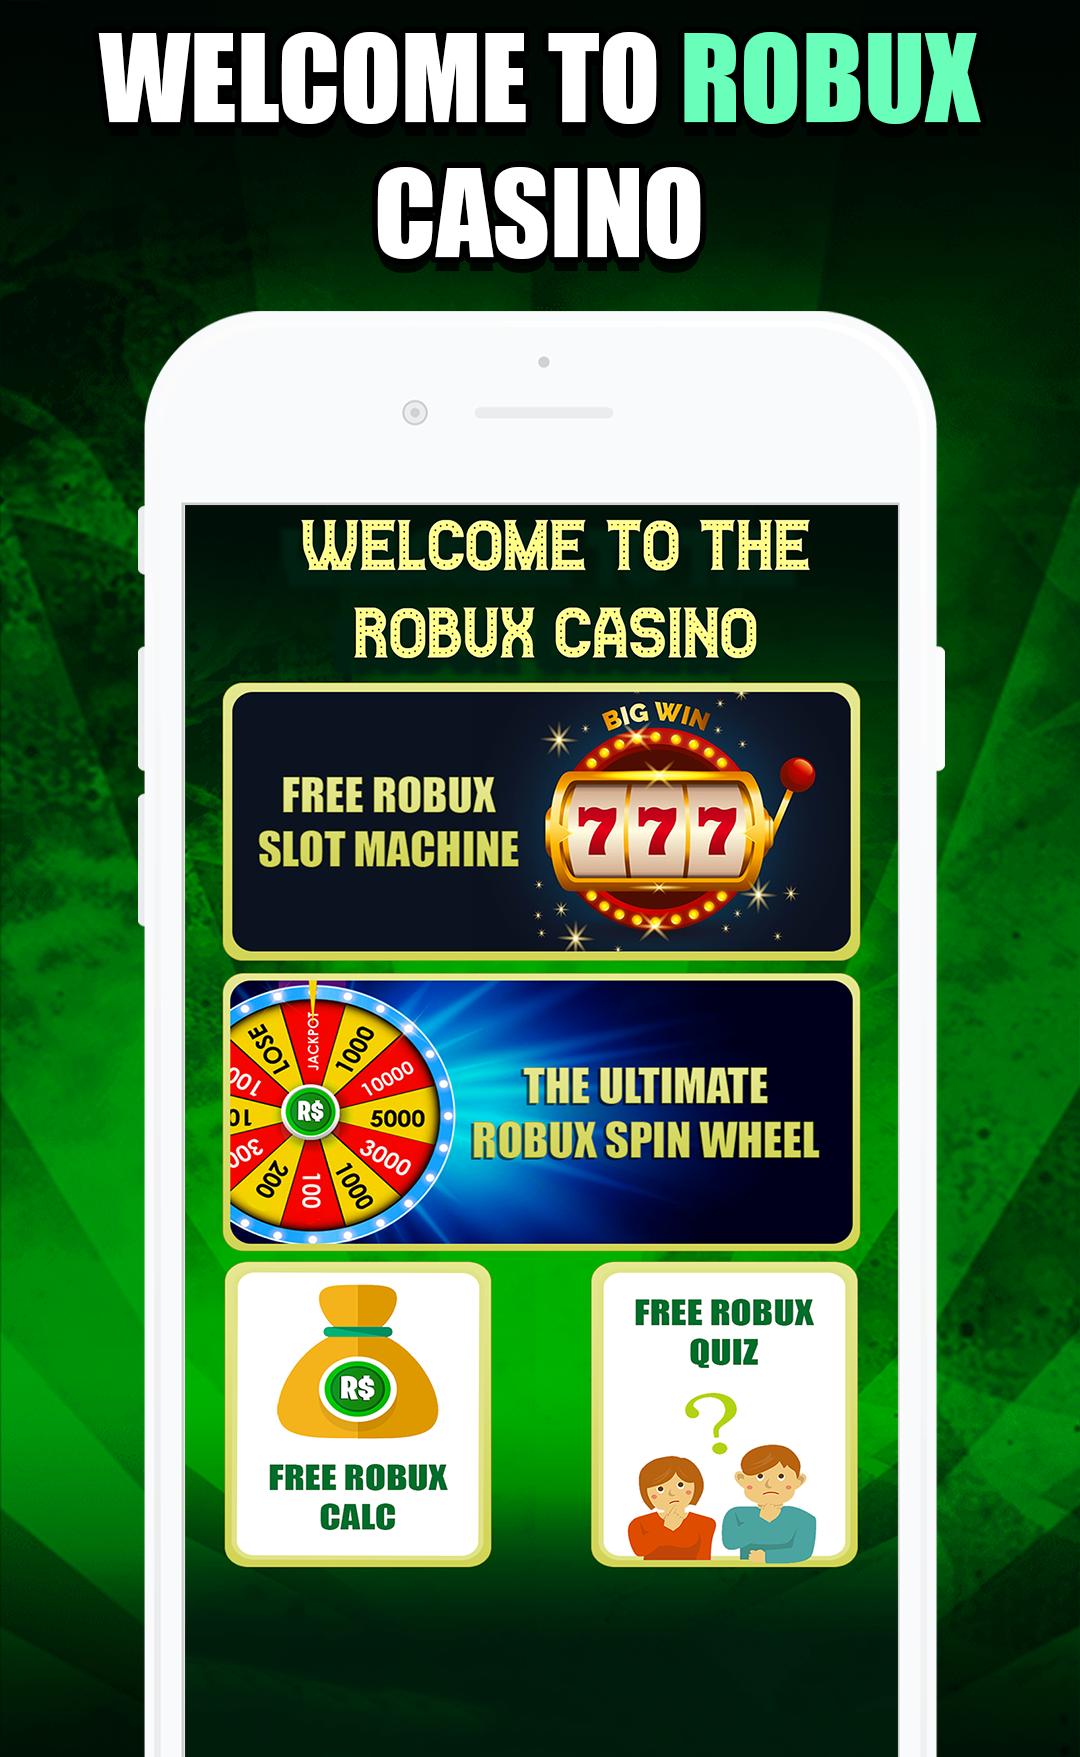 Robux Casino Free Robux Slot Machine Rbx Wheel For Android Apk Download - free robux calc and spin wheel free android app appbrain